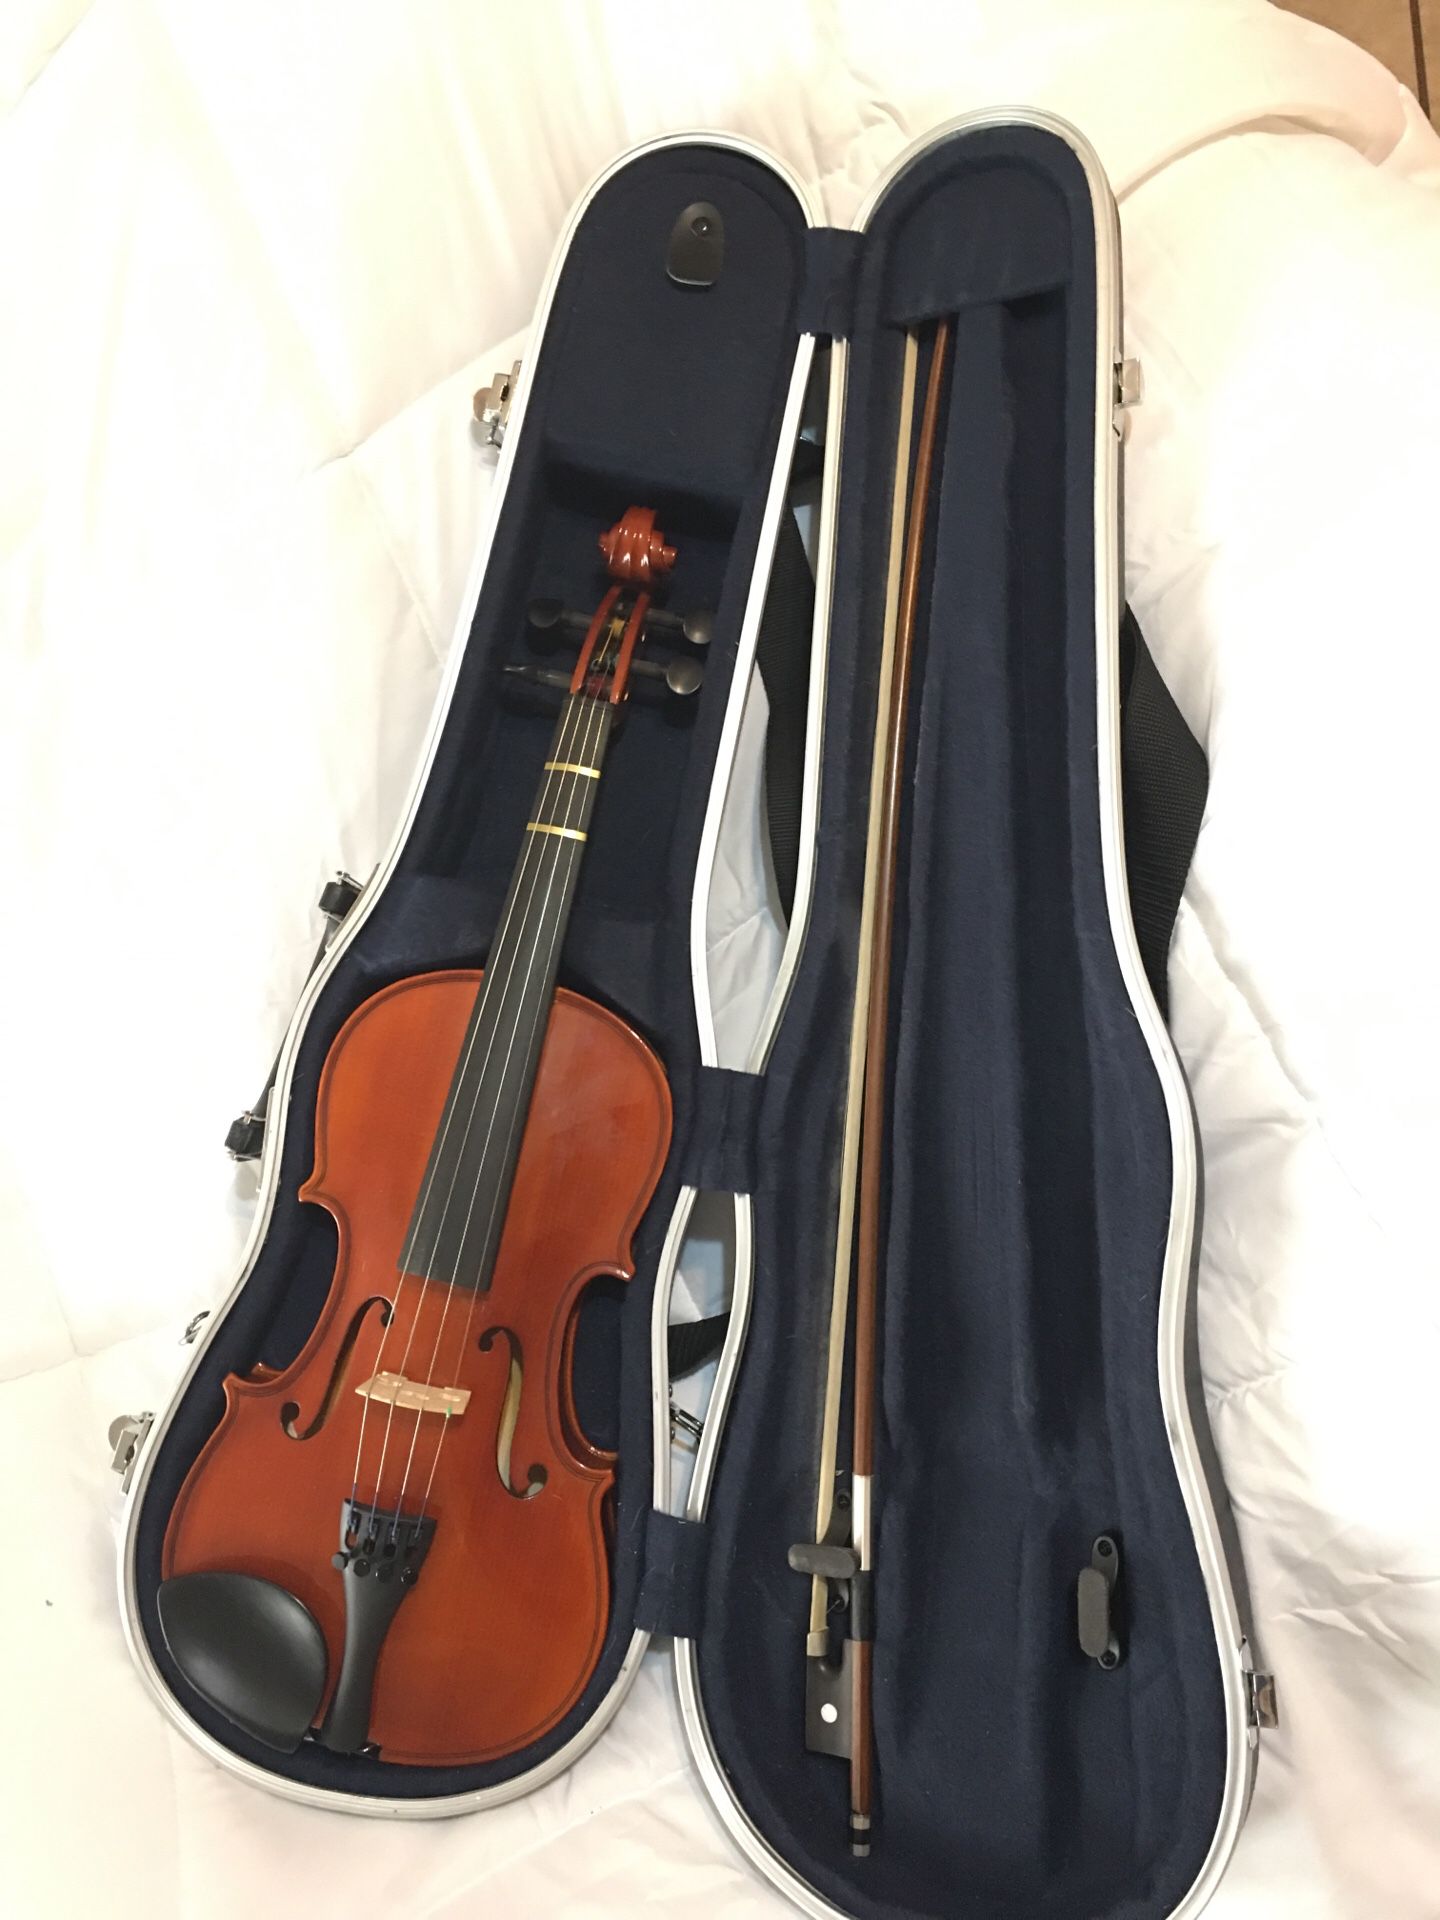 Yamaha 3/4 Student Violin $250 firm excellent condition